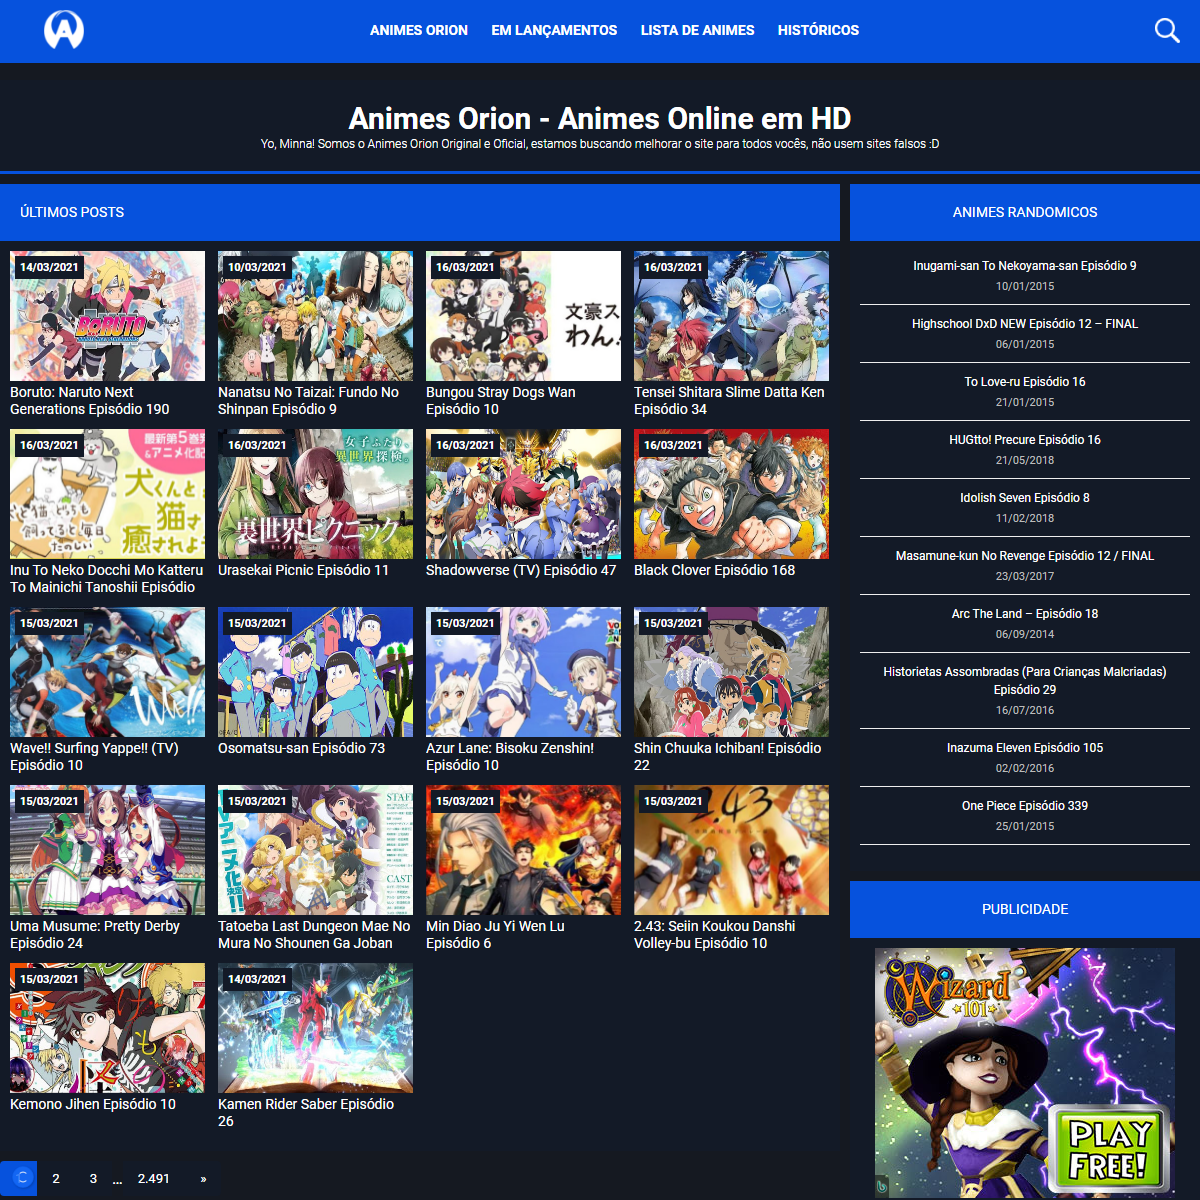 A complete backup of https://www.animesorionoficial.com/